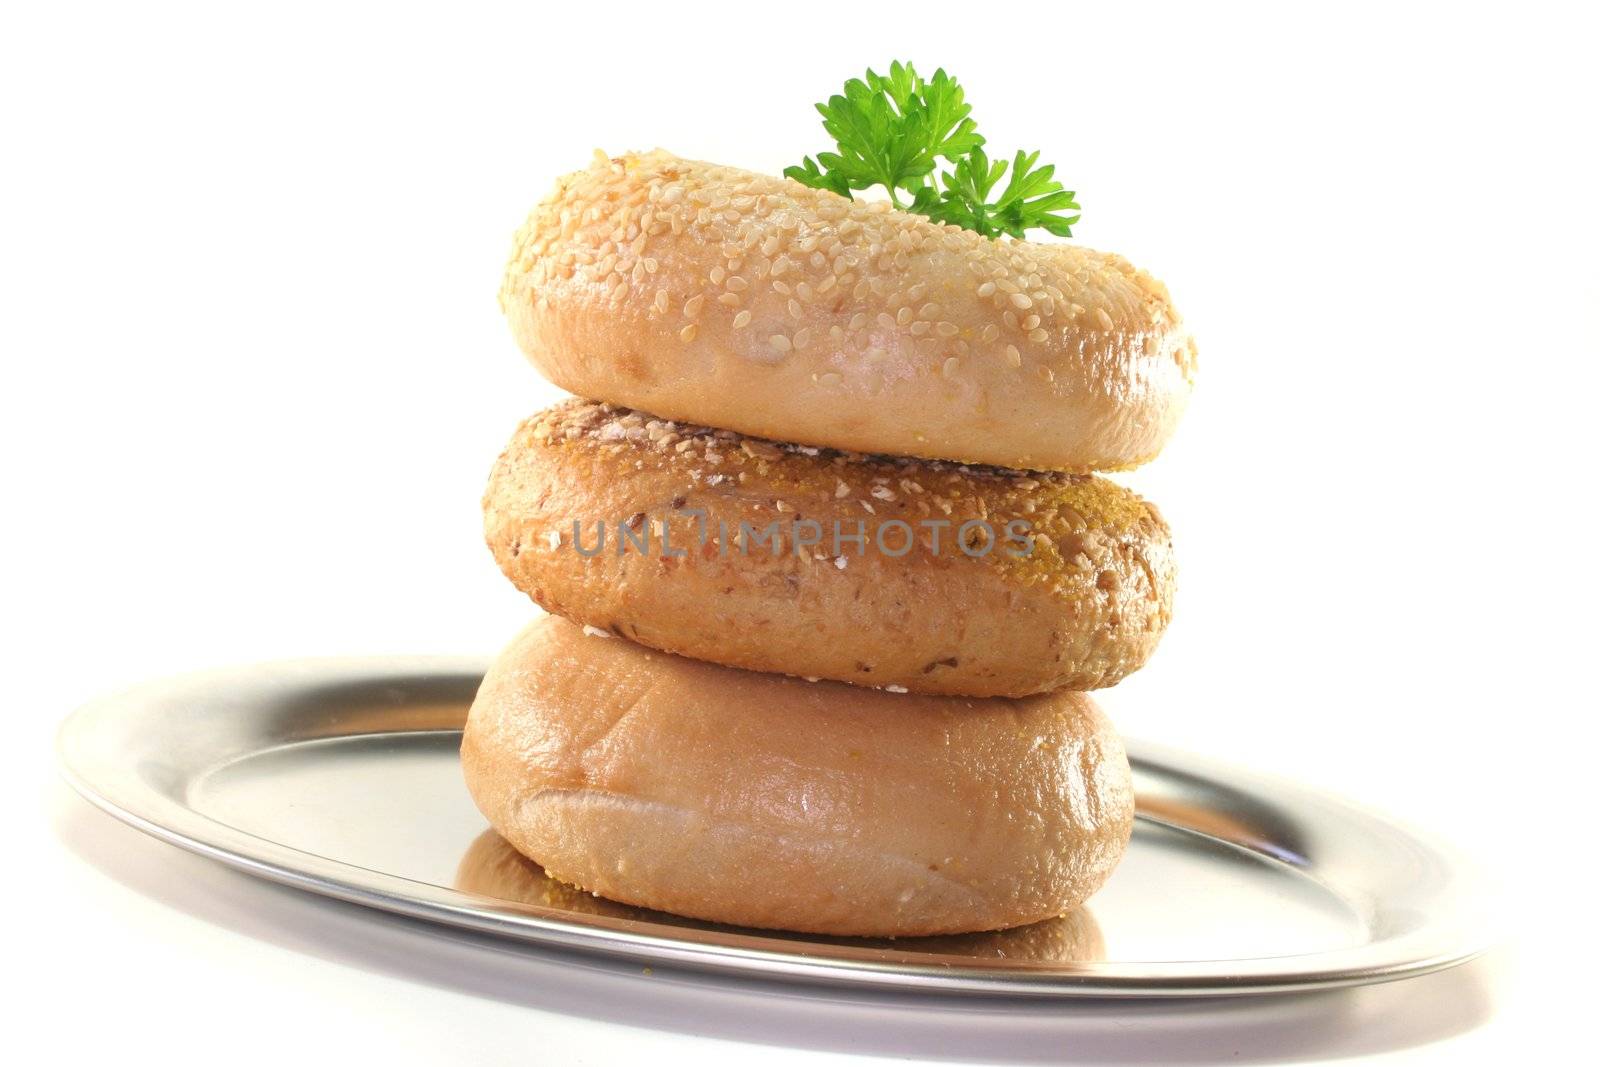 three bagel with parsley on a platter before a white background